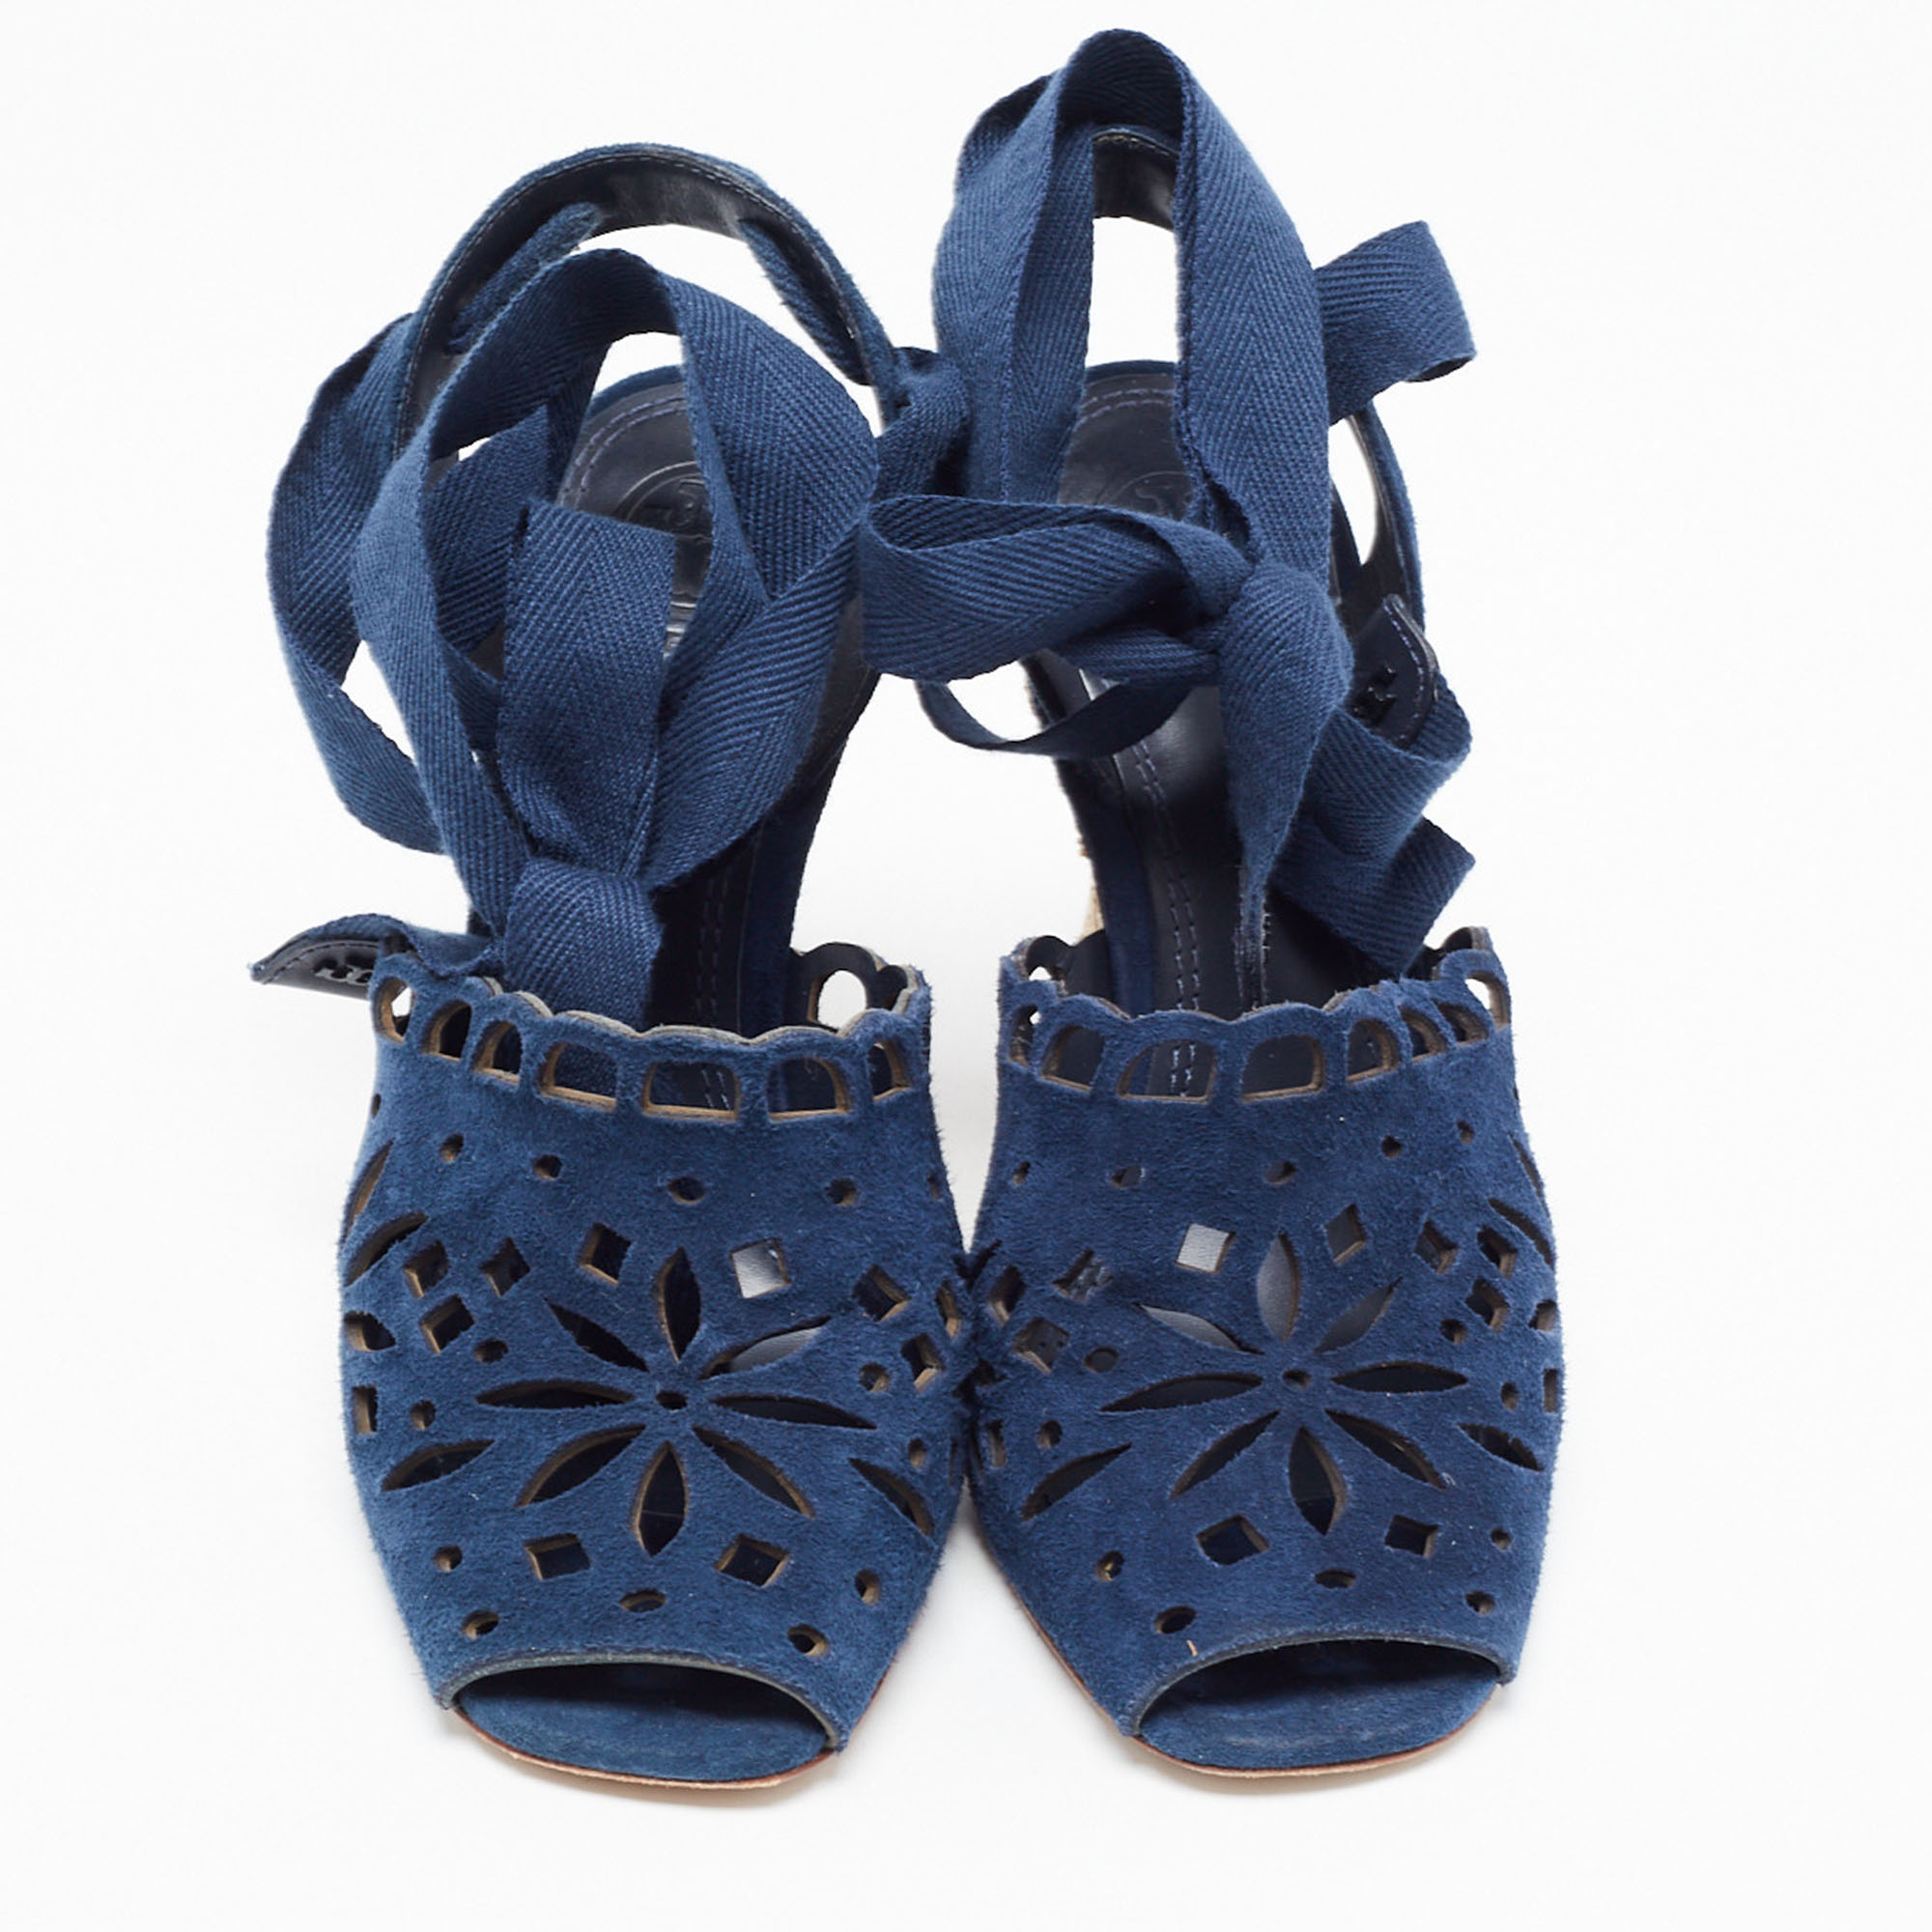 Tory Burch Navy Blue Laser Cut Suede Ankle Tie Wedge Sandals Size 36.5